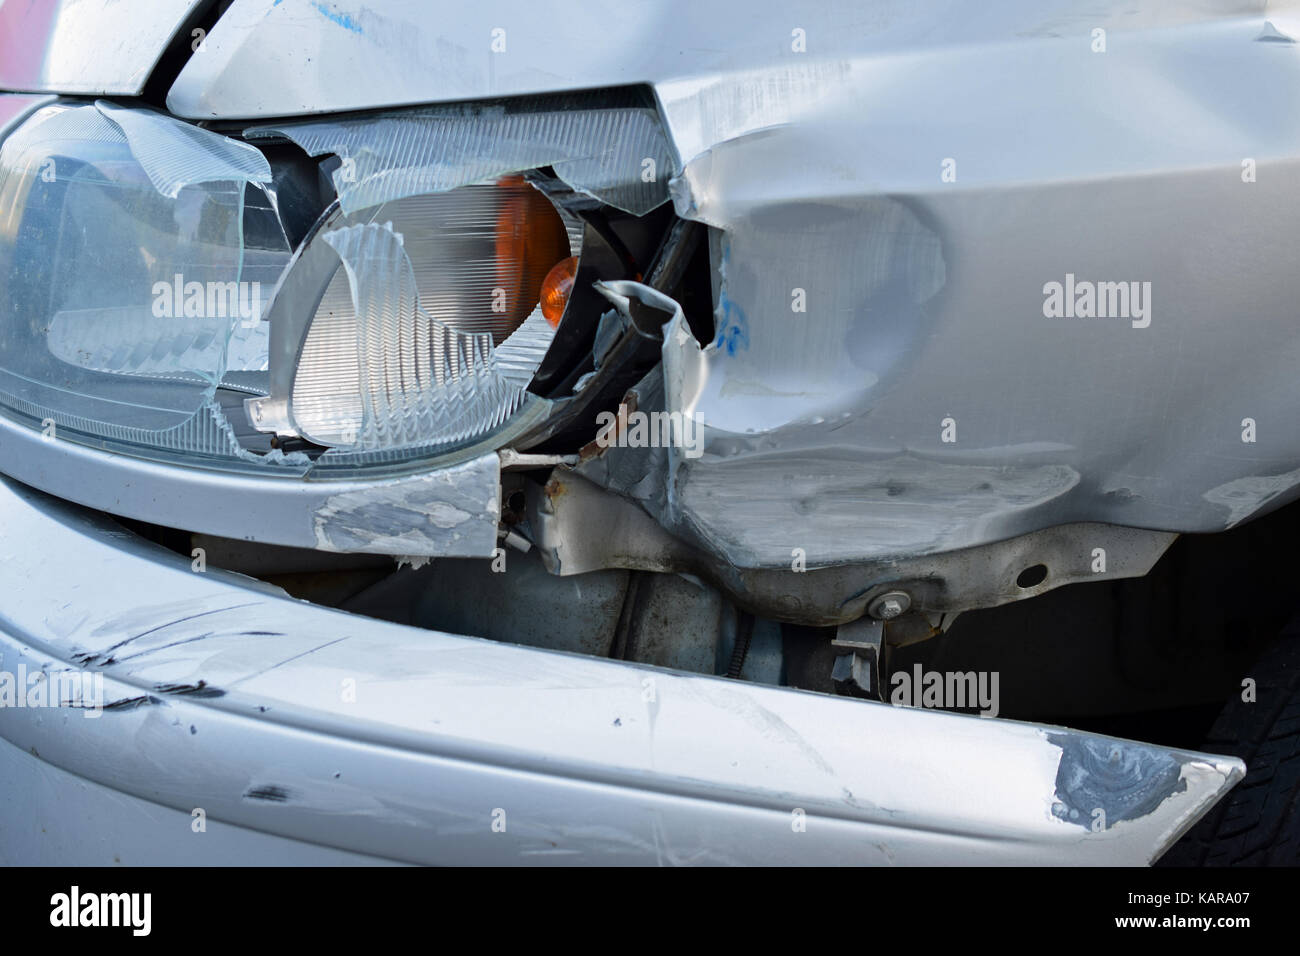 Damaged car after accident Stock Photo